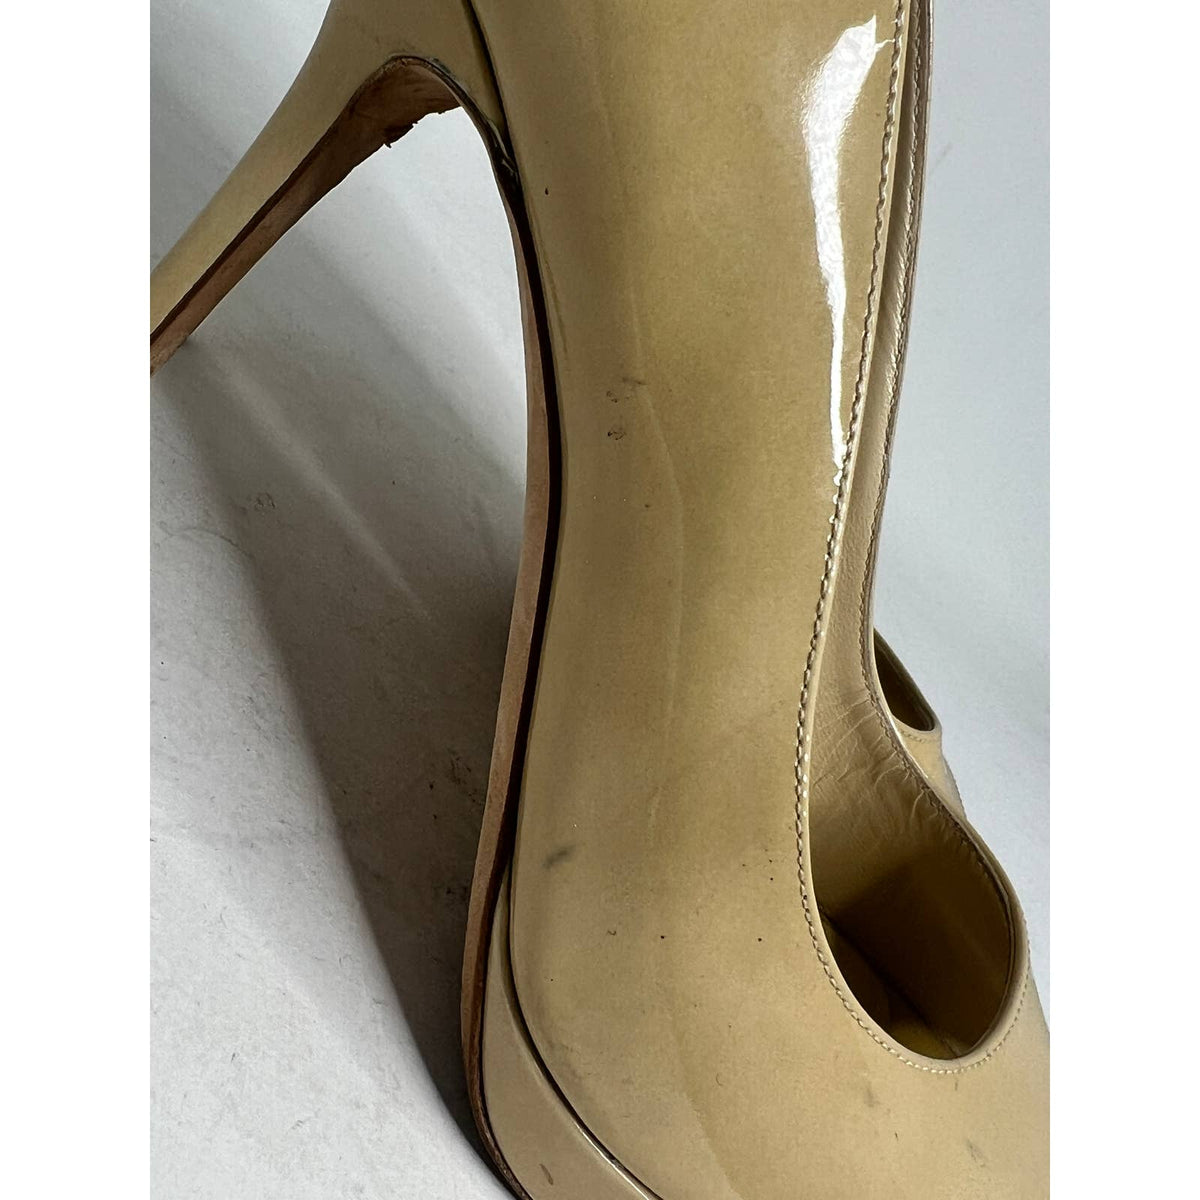 Jimmy Choo Nude Patent Leather Pumps Sz. 9.5(39.5)